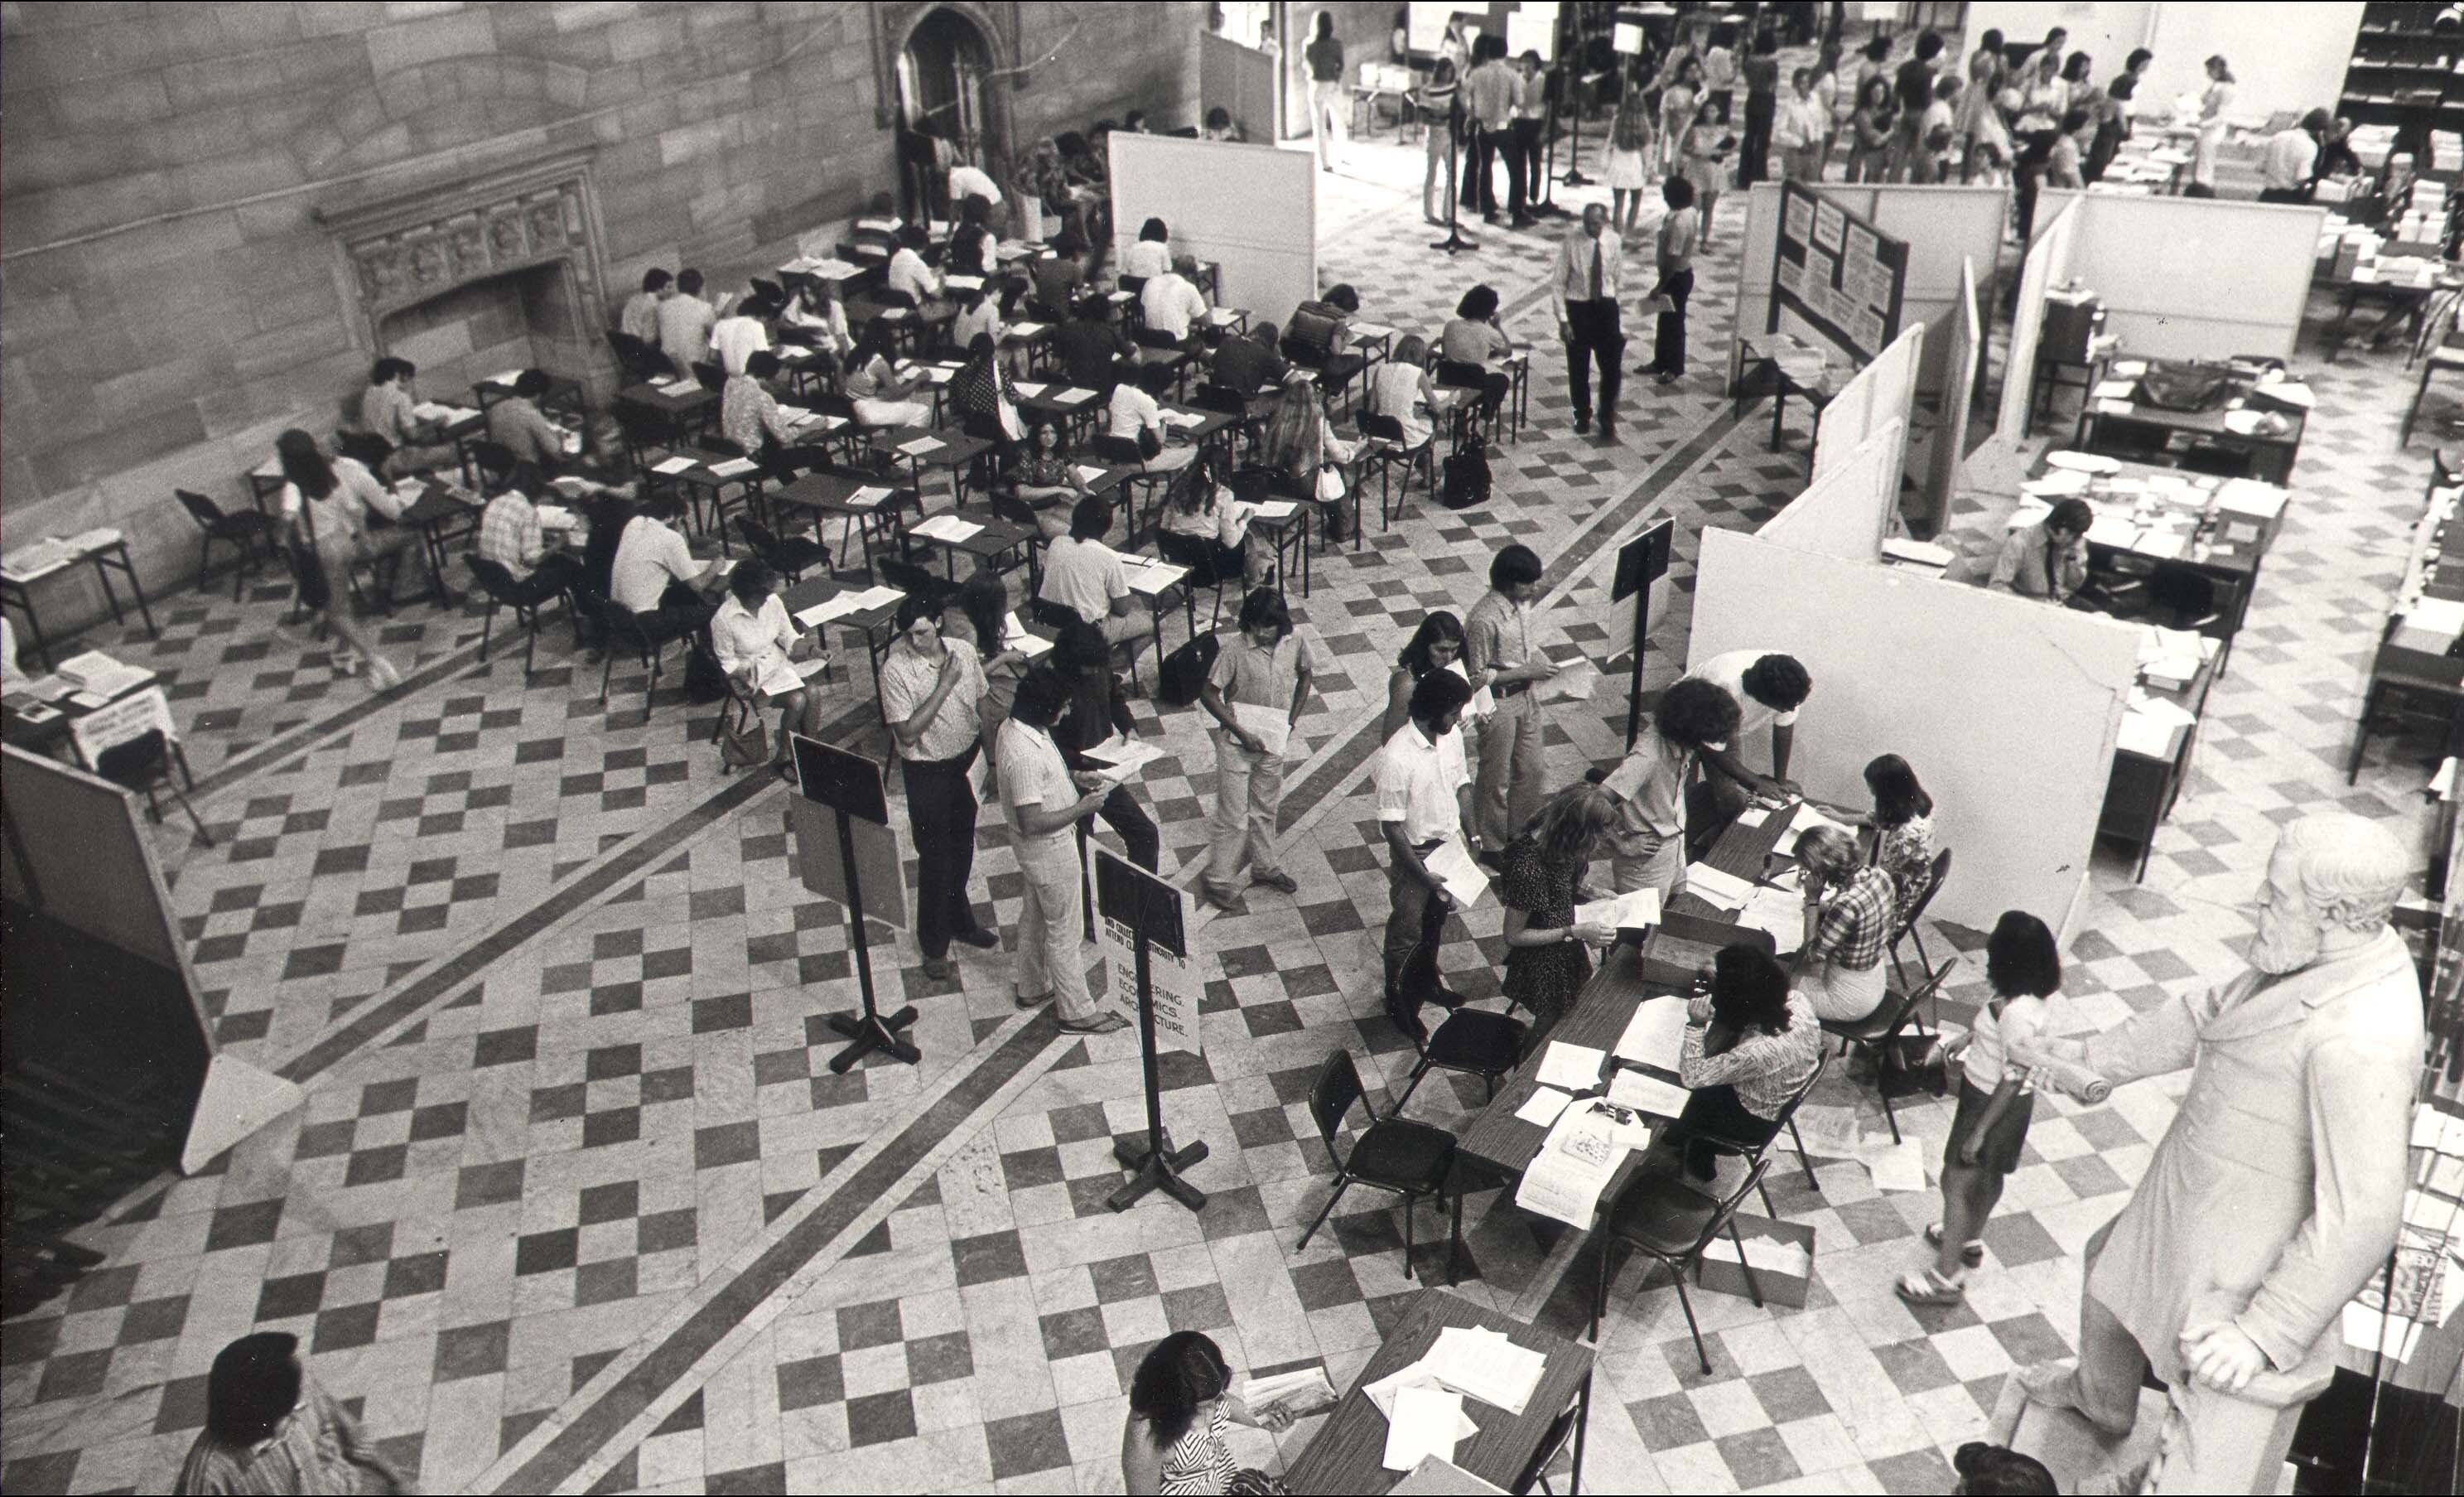 ENROLMENT OF FIRST YEAR STUDENTS IN THE GREAT HALL